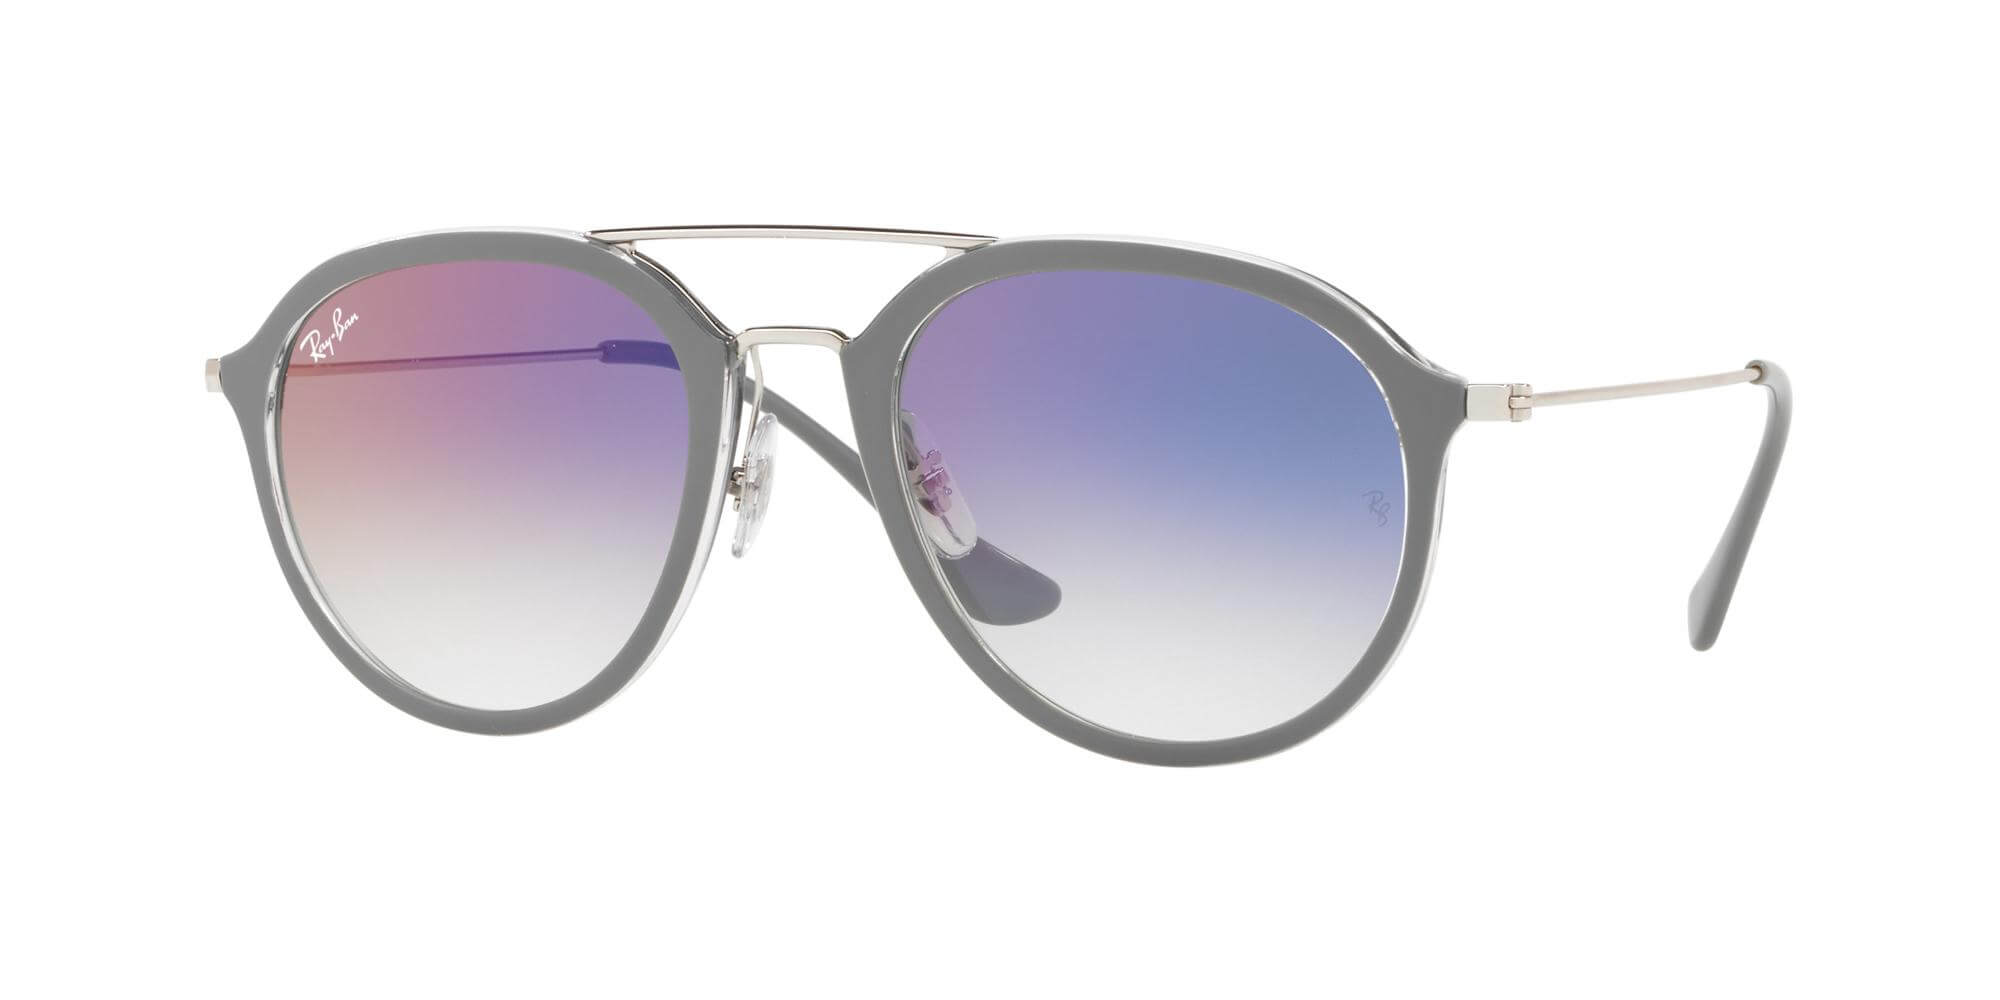 Ray-BanRB 4253Grey/violet Shaded (6337/S5)